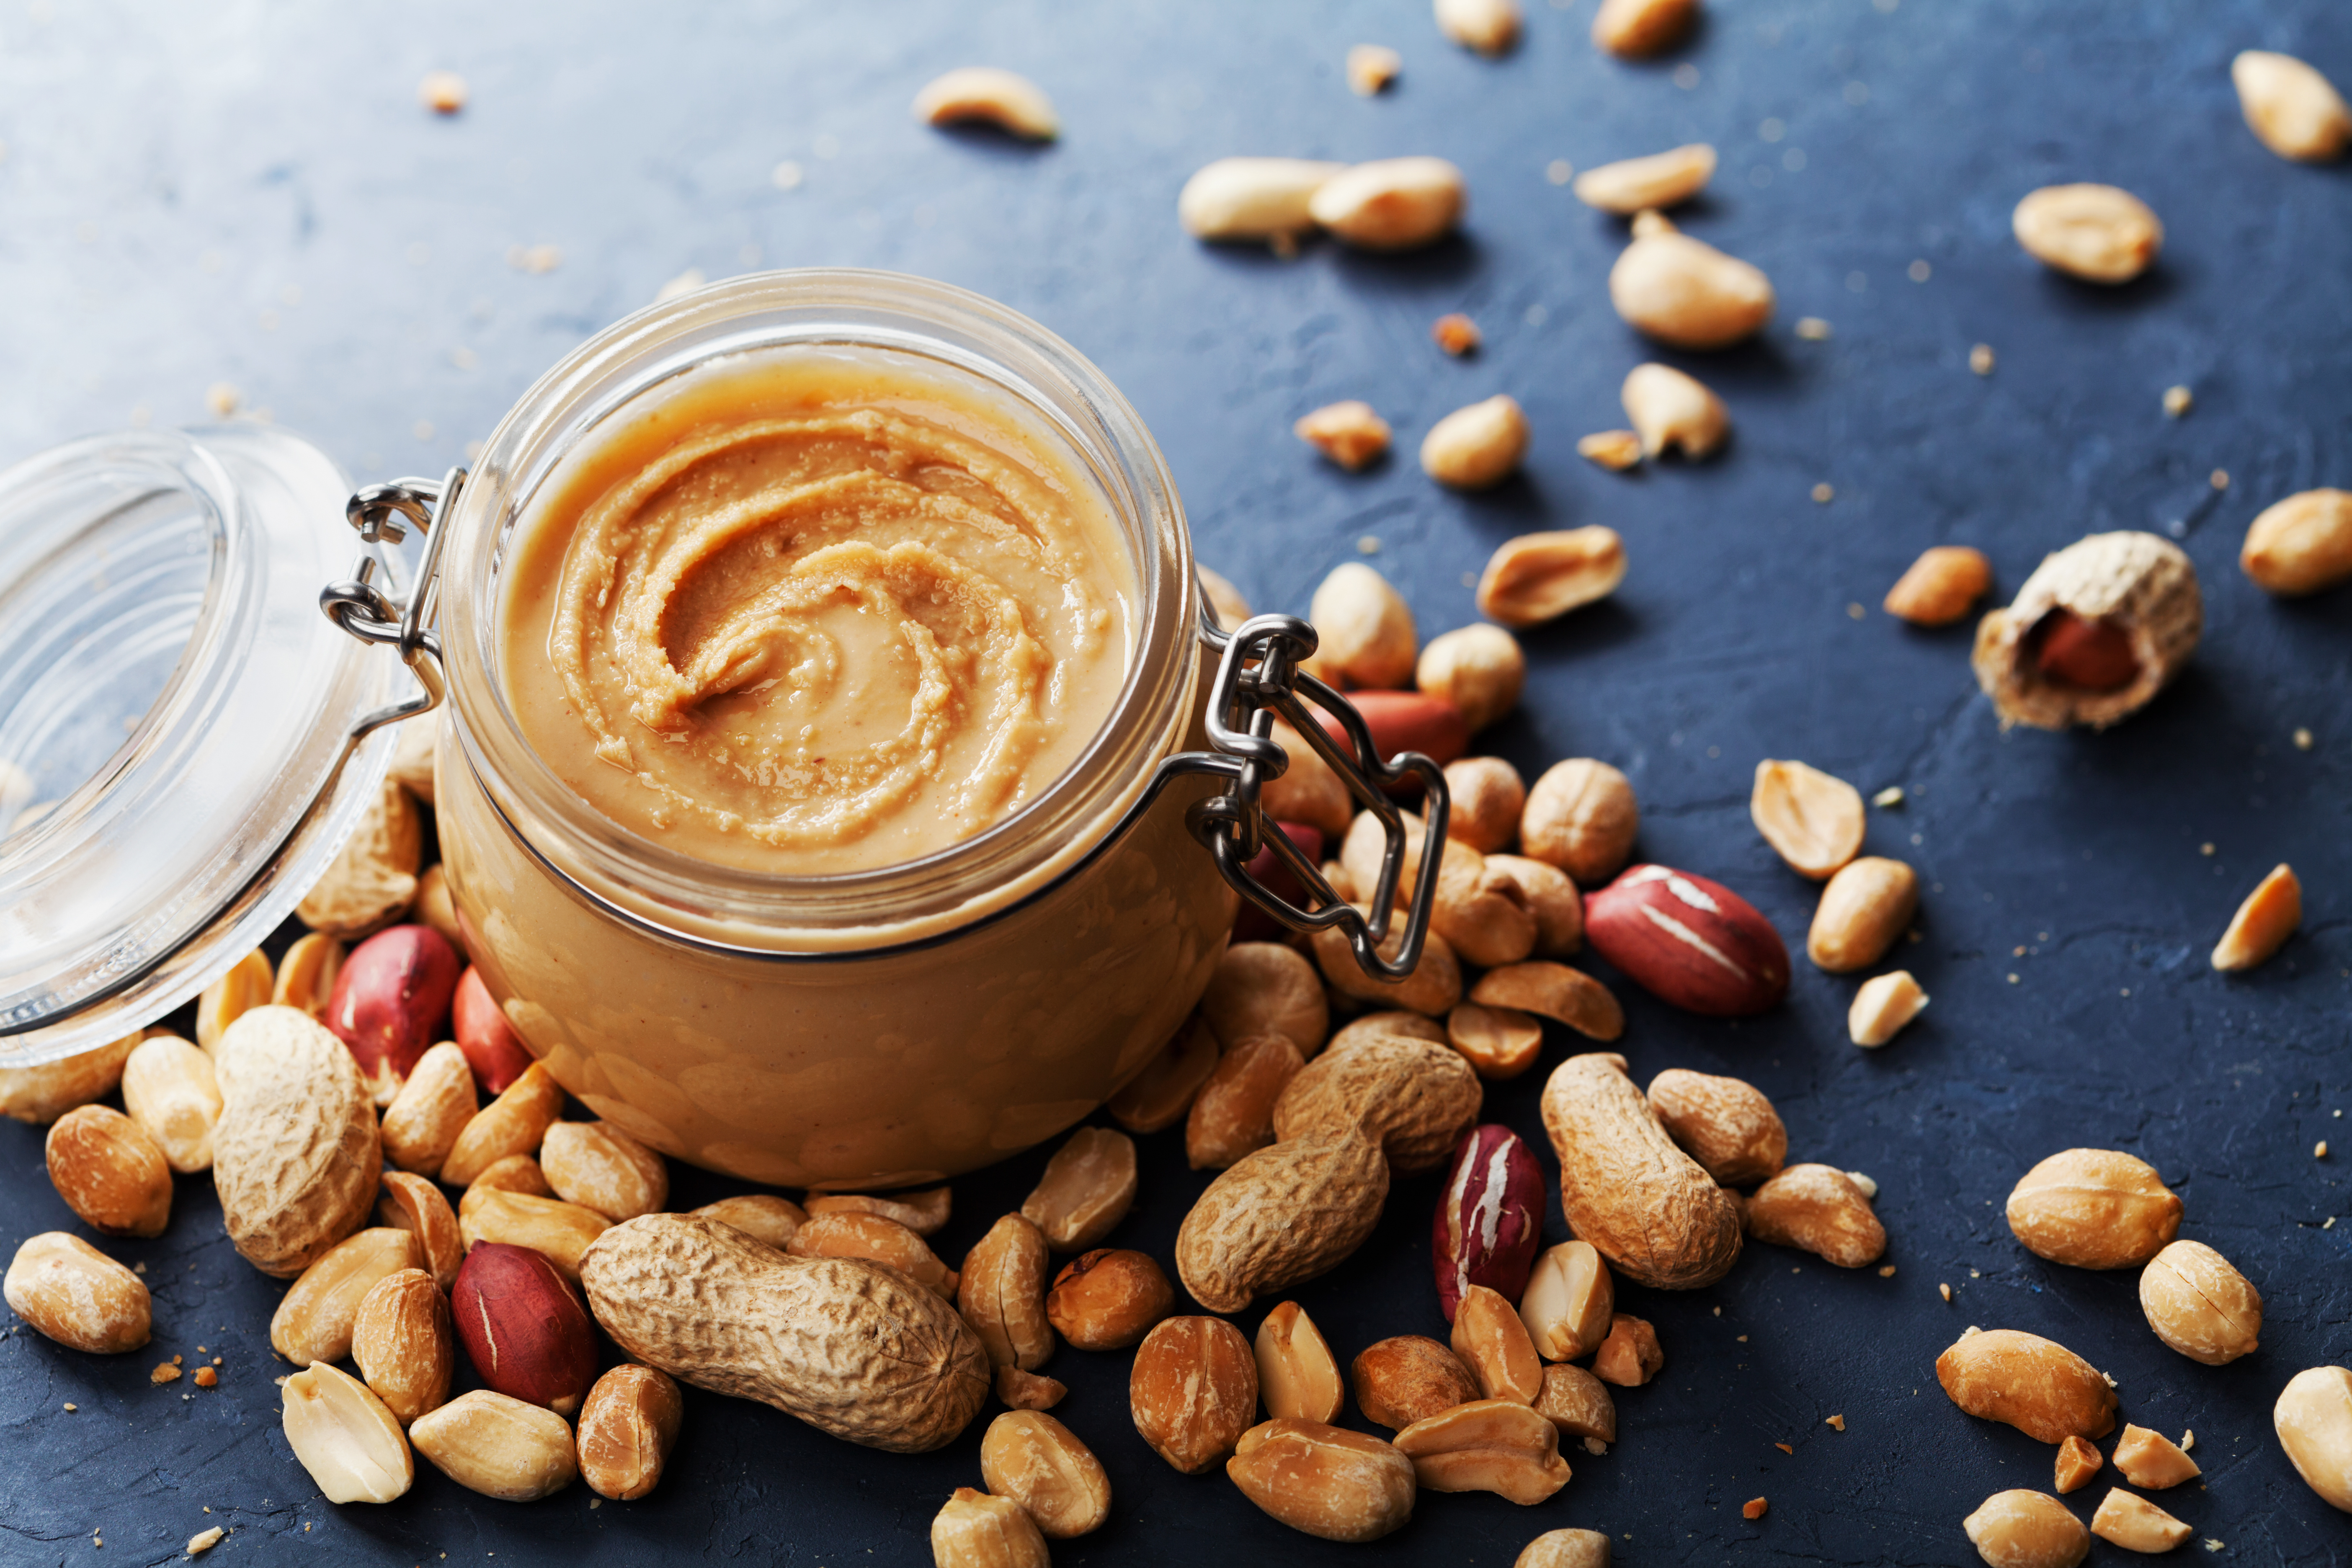 Recipe of the Day - Kitchen Savvy: Homemade Nut Butter in Minutes